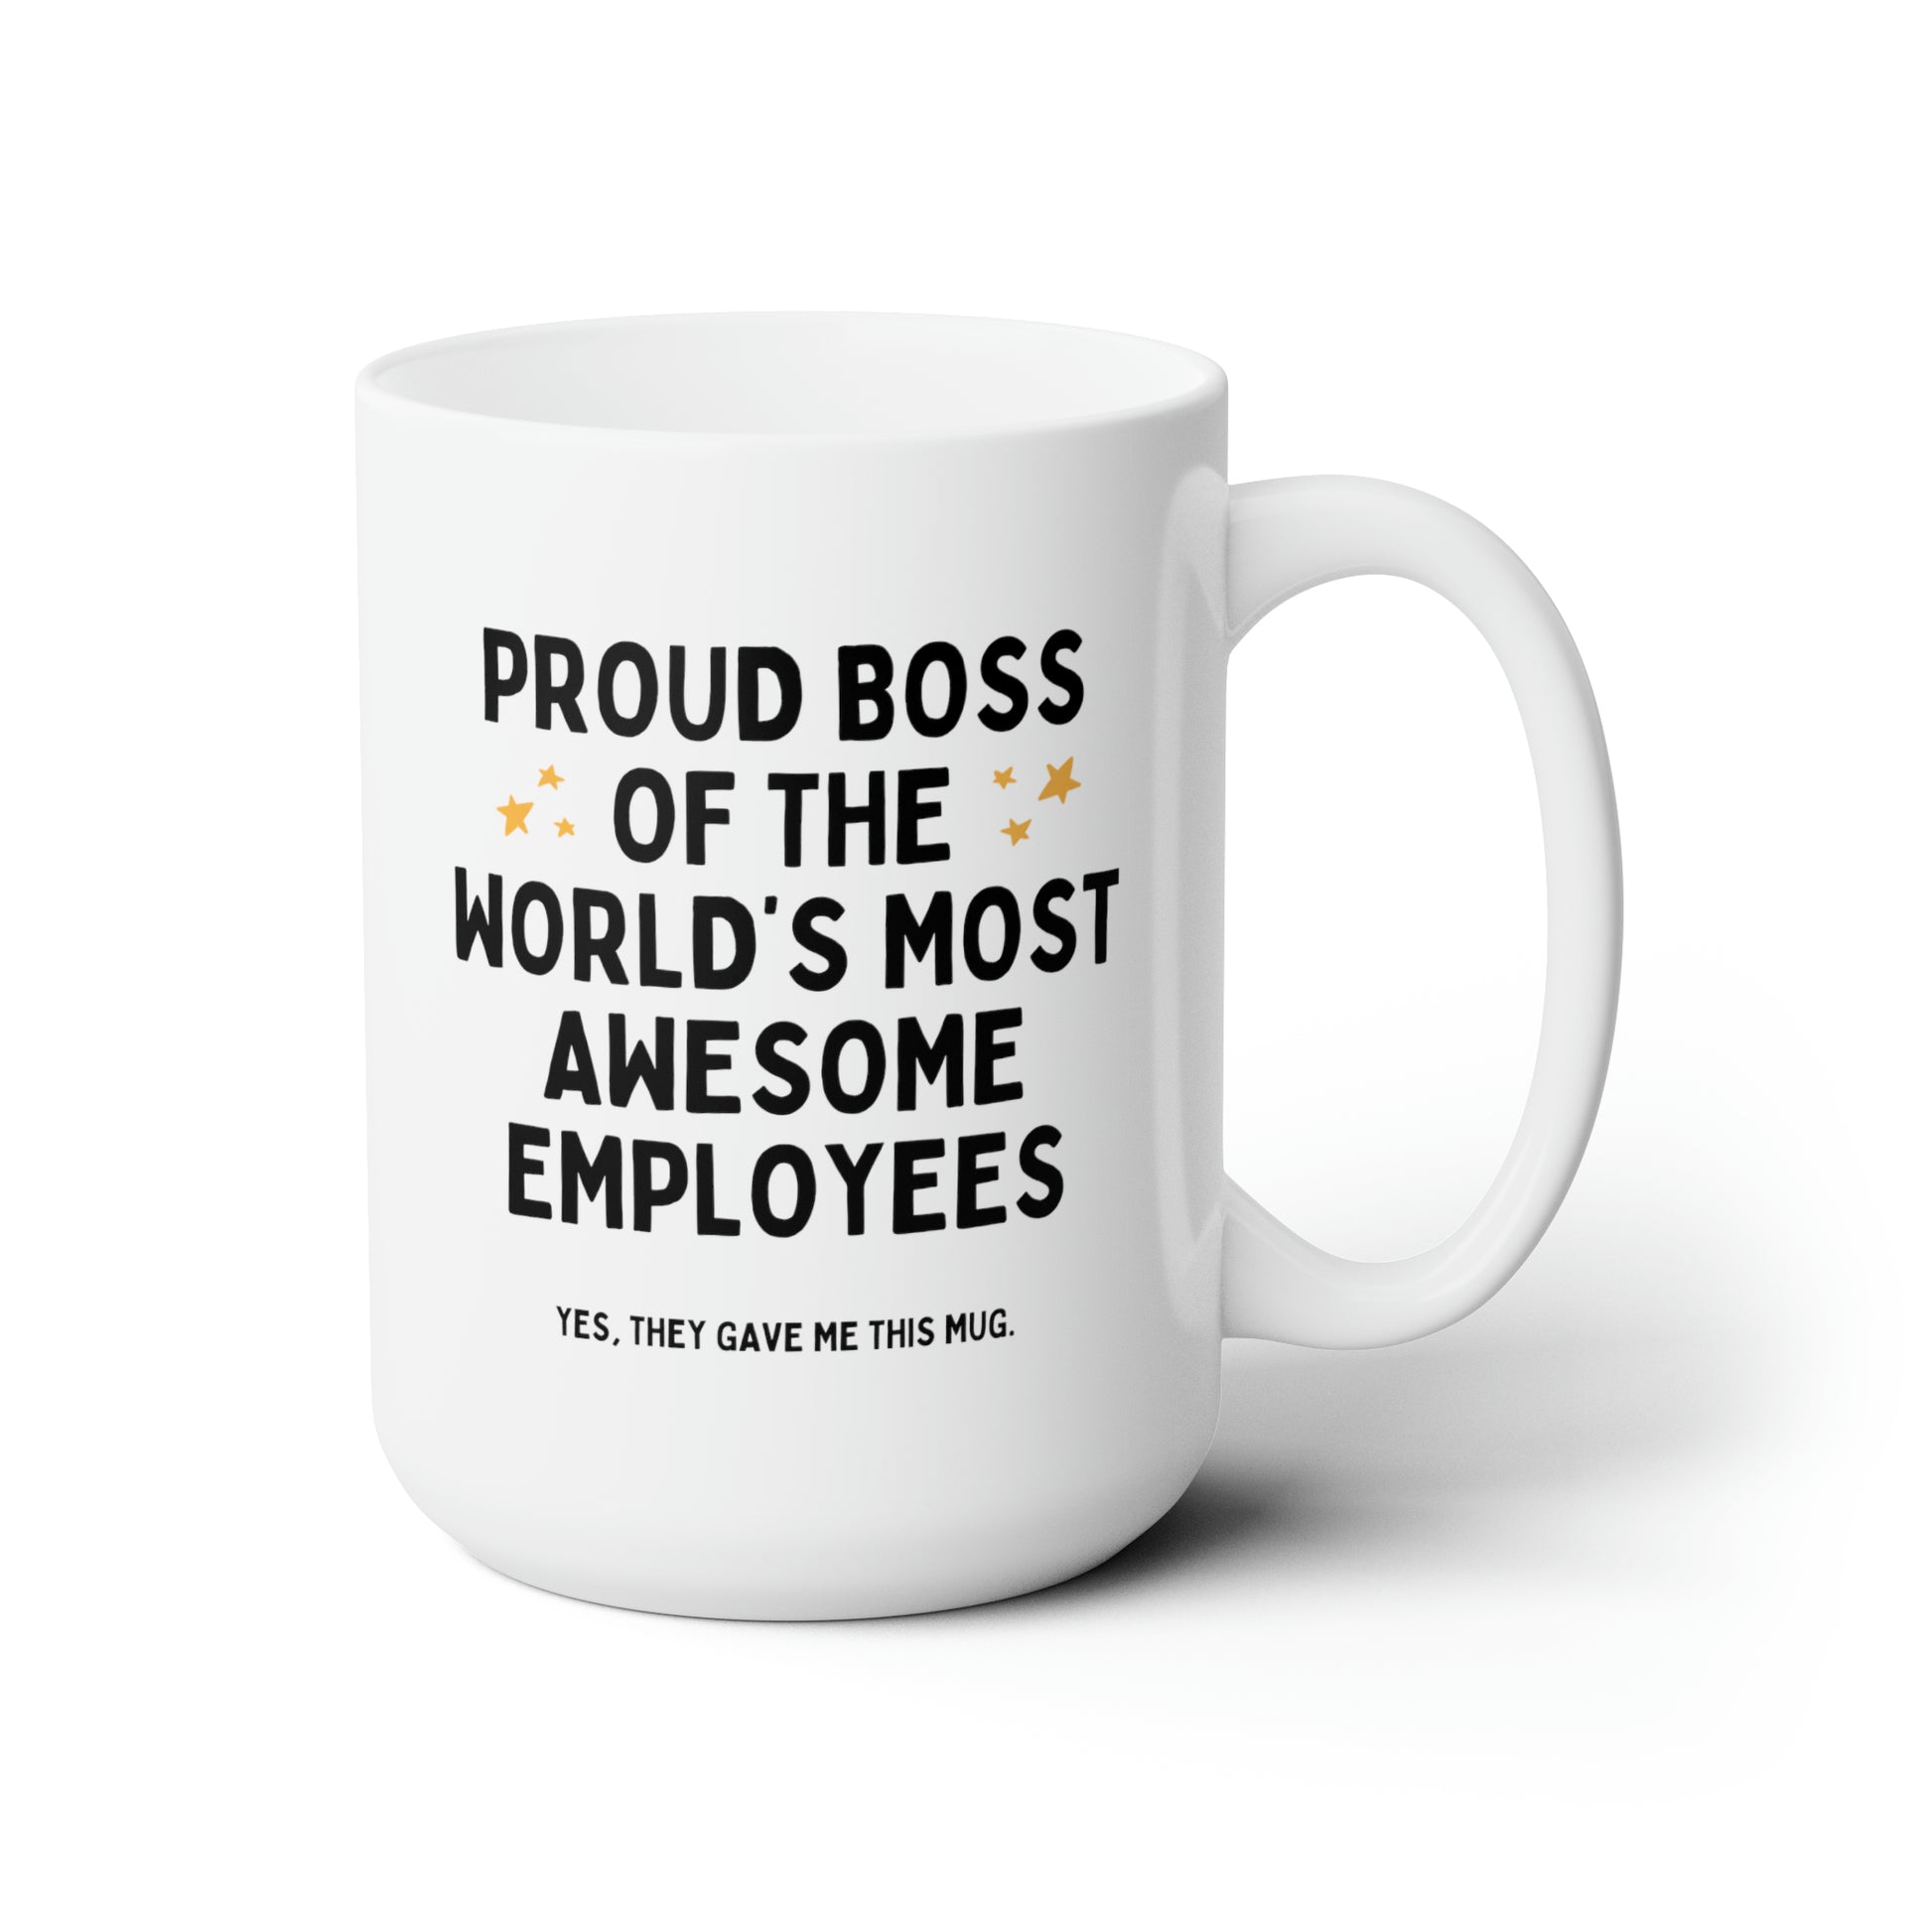 Proud Boss Of The World's Most Awesome Employees 15oz white funny large coffee mug gift for secret santa coworker supervisor appreciation waveywares wavey wares wavywares wavy wares